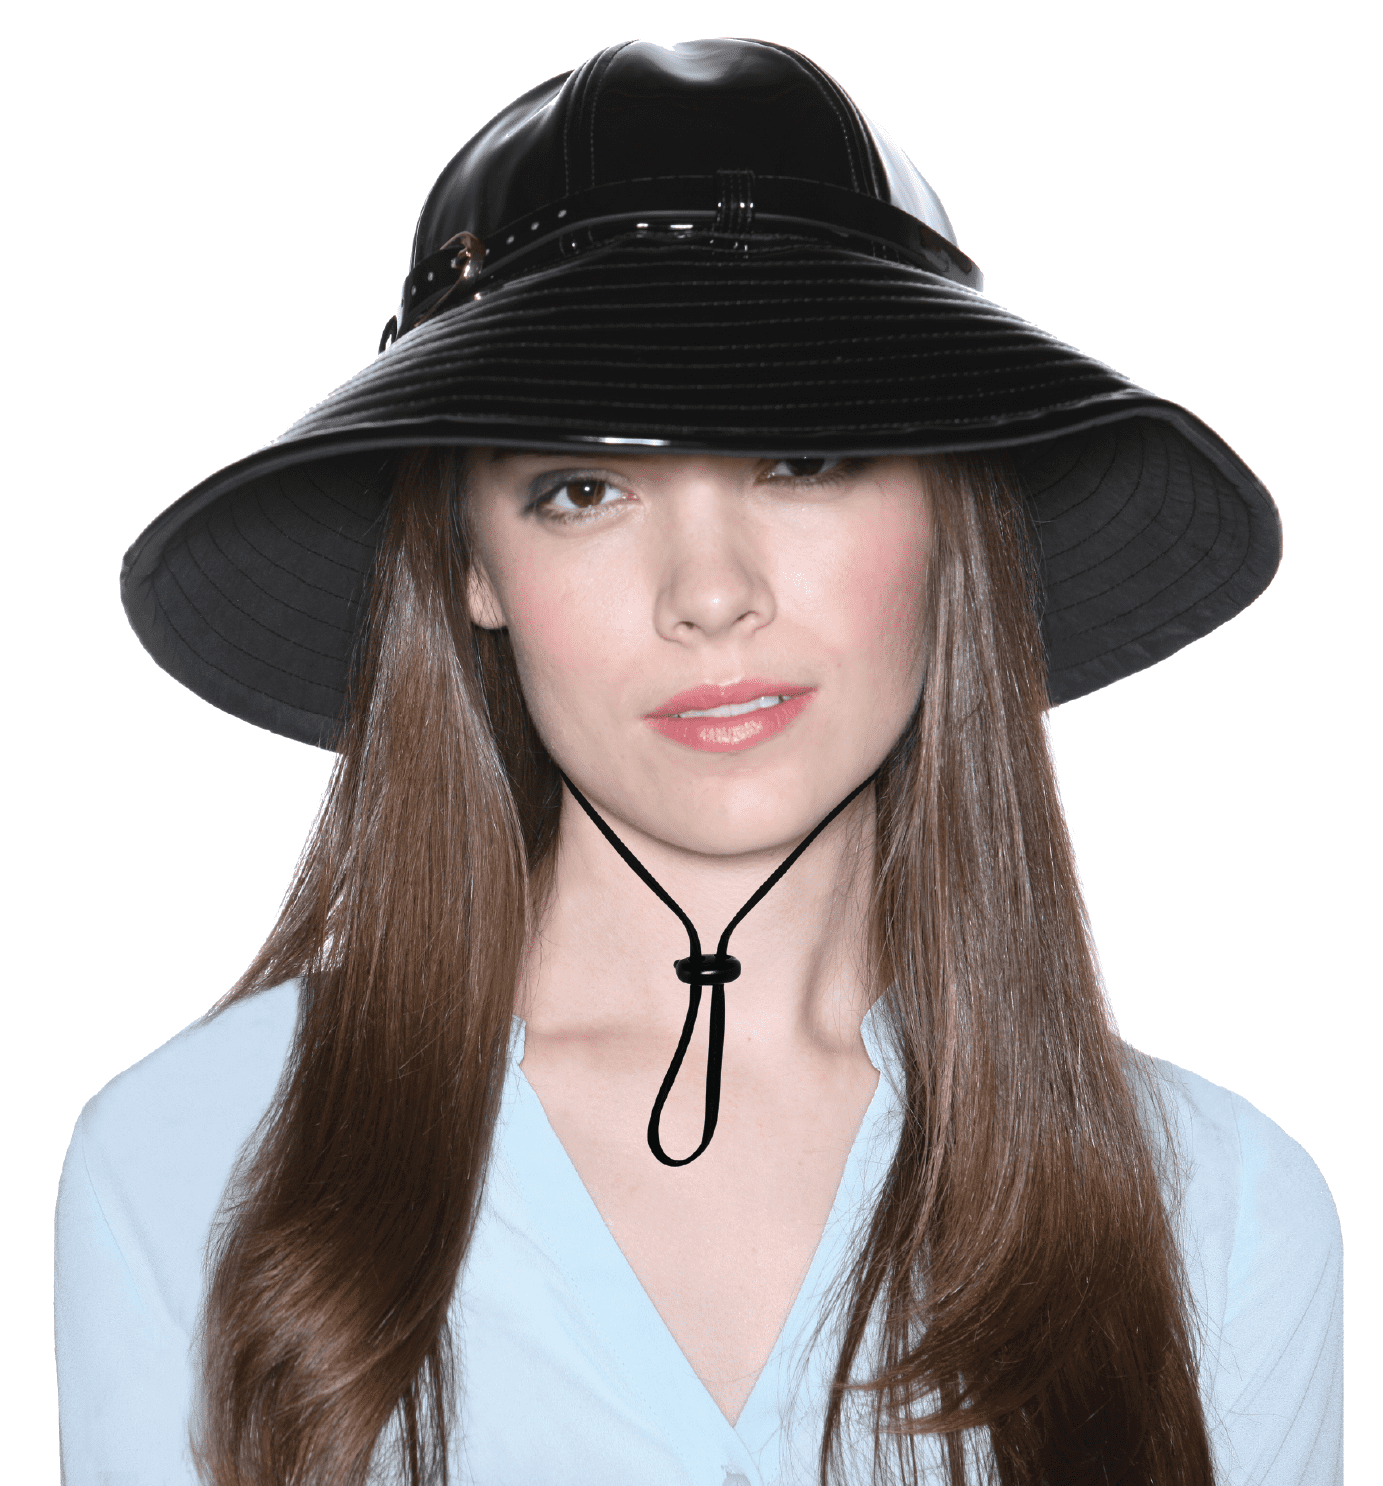 VINRELLA Rain Hat for Woman with Adjustable Chin Strap One Size Fits All,